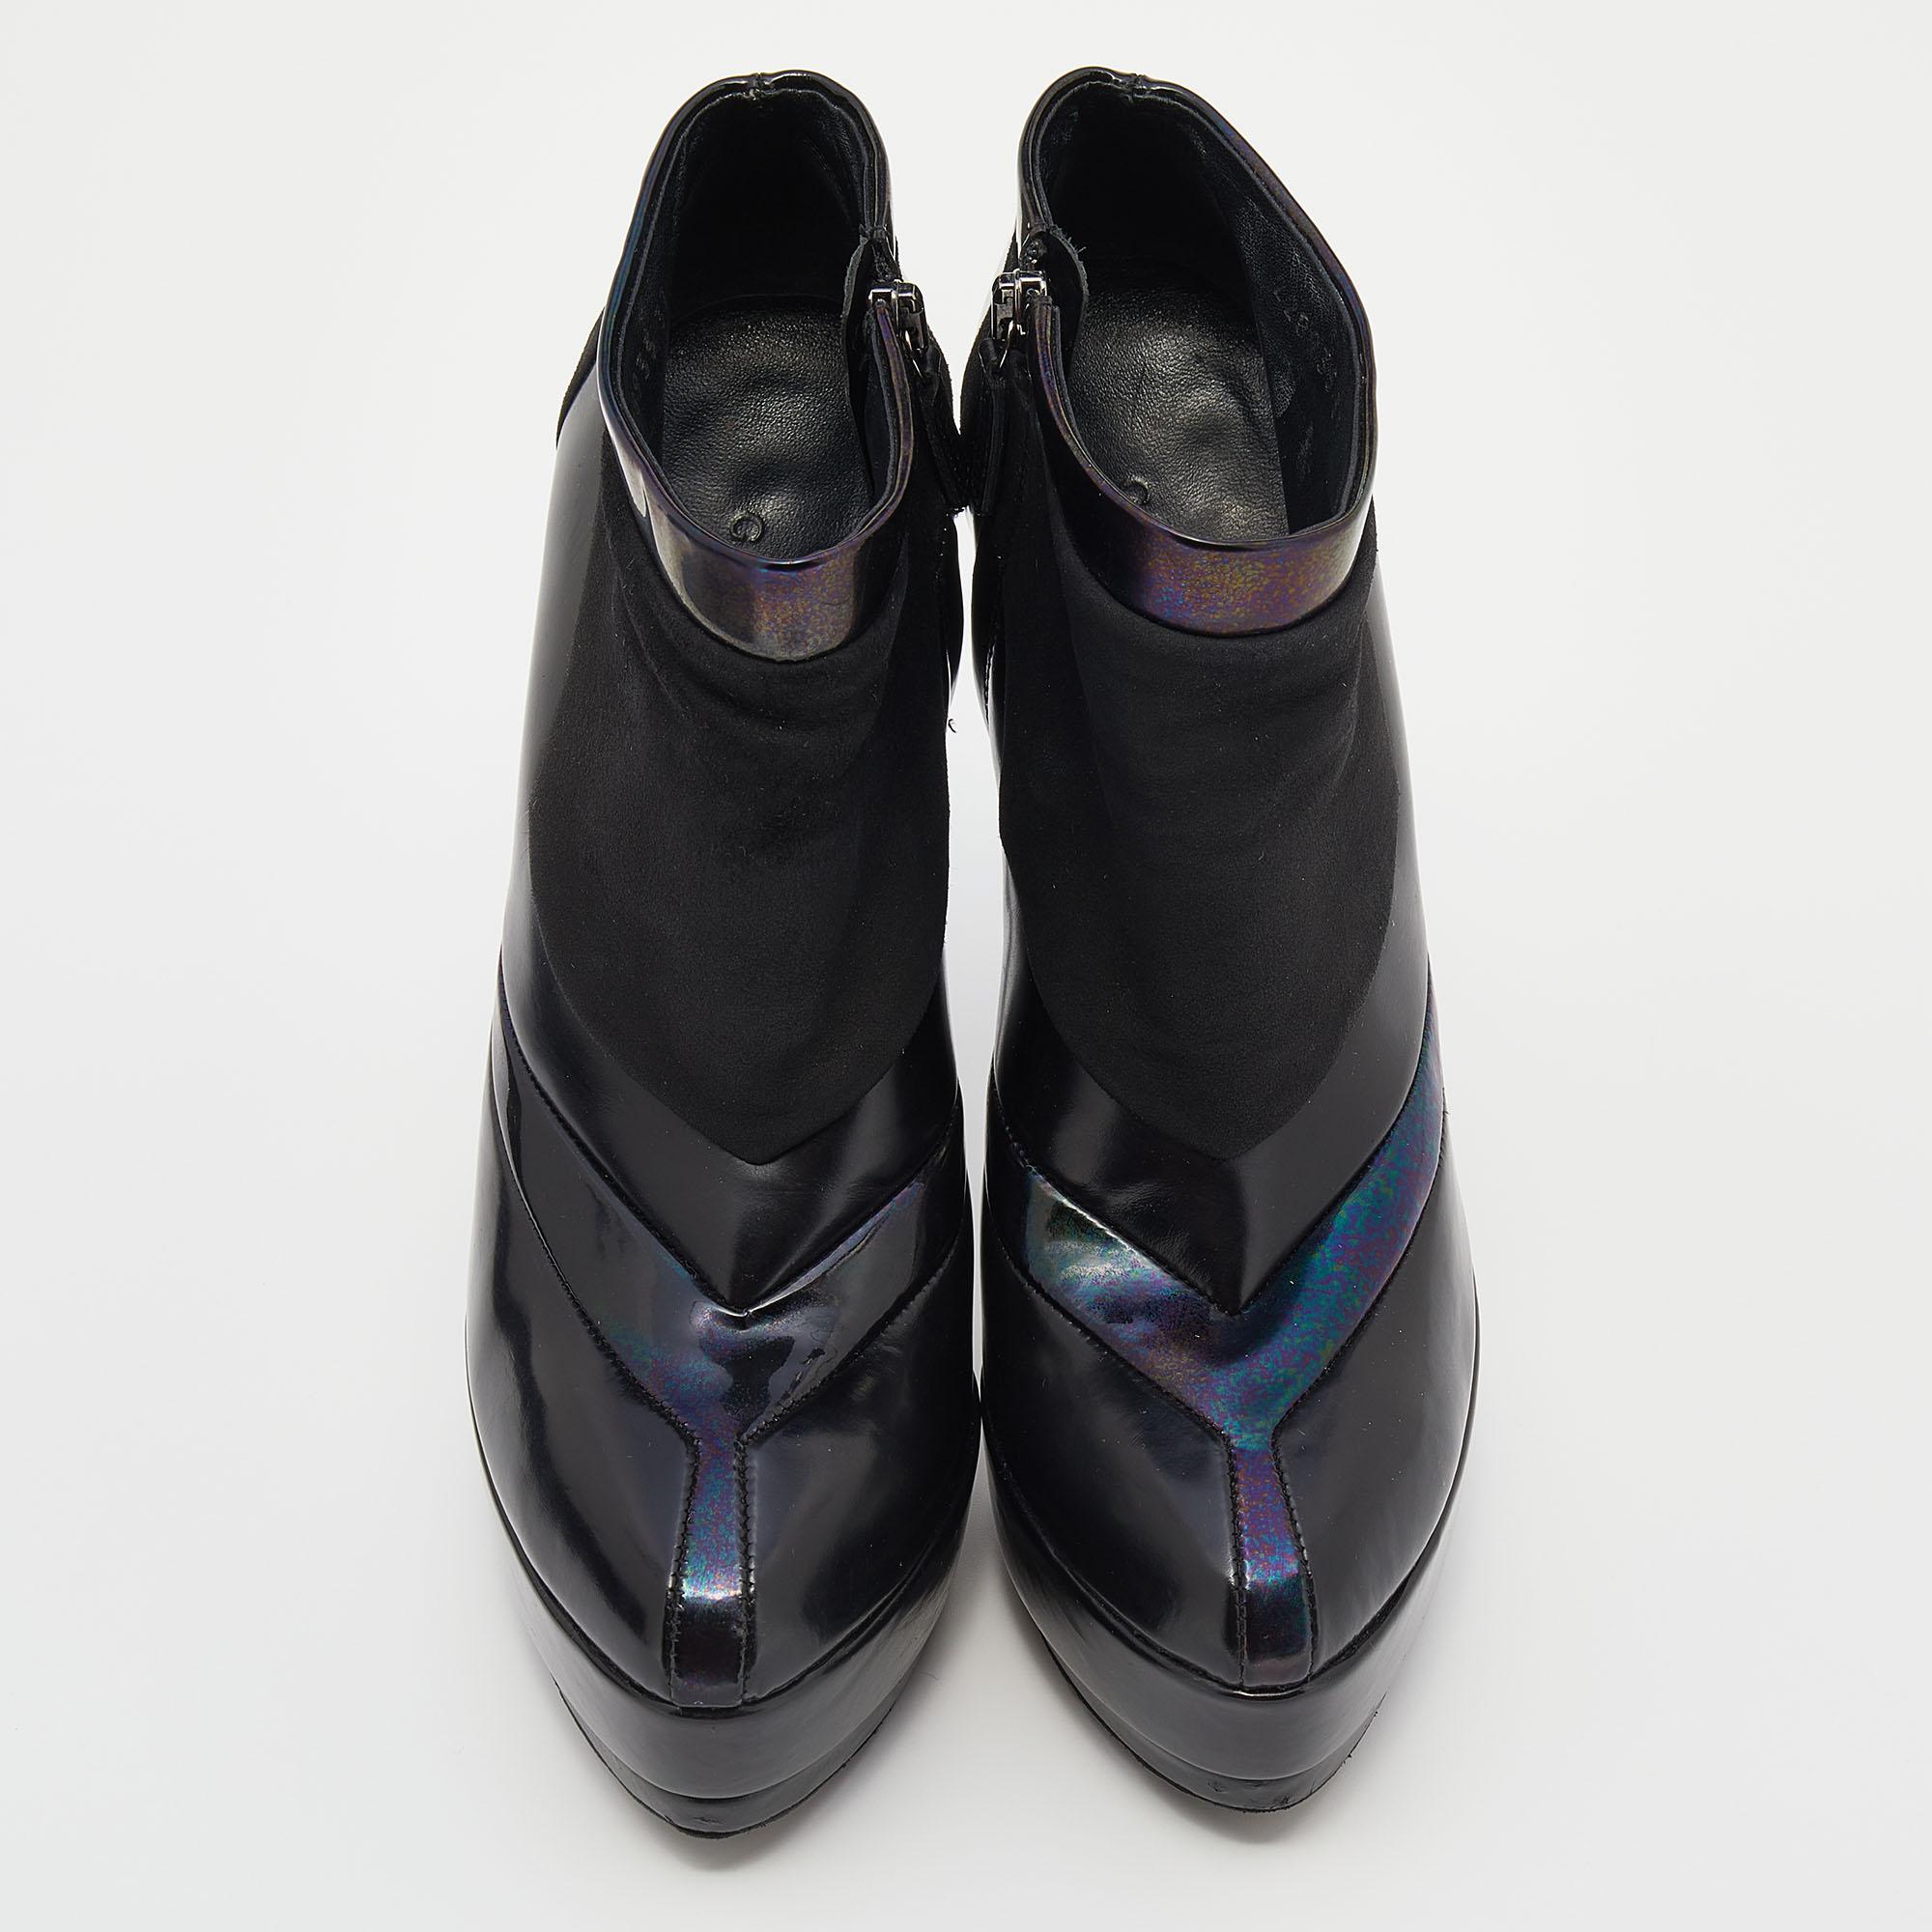 Meticulously designed, one can instantly fall in love with these ankle boots from Gucci! Painstakingly crafted into a smart silhouette, these boots are on-point with style. They come with comfortable insoles and durable outsoles. These boots are